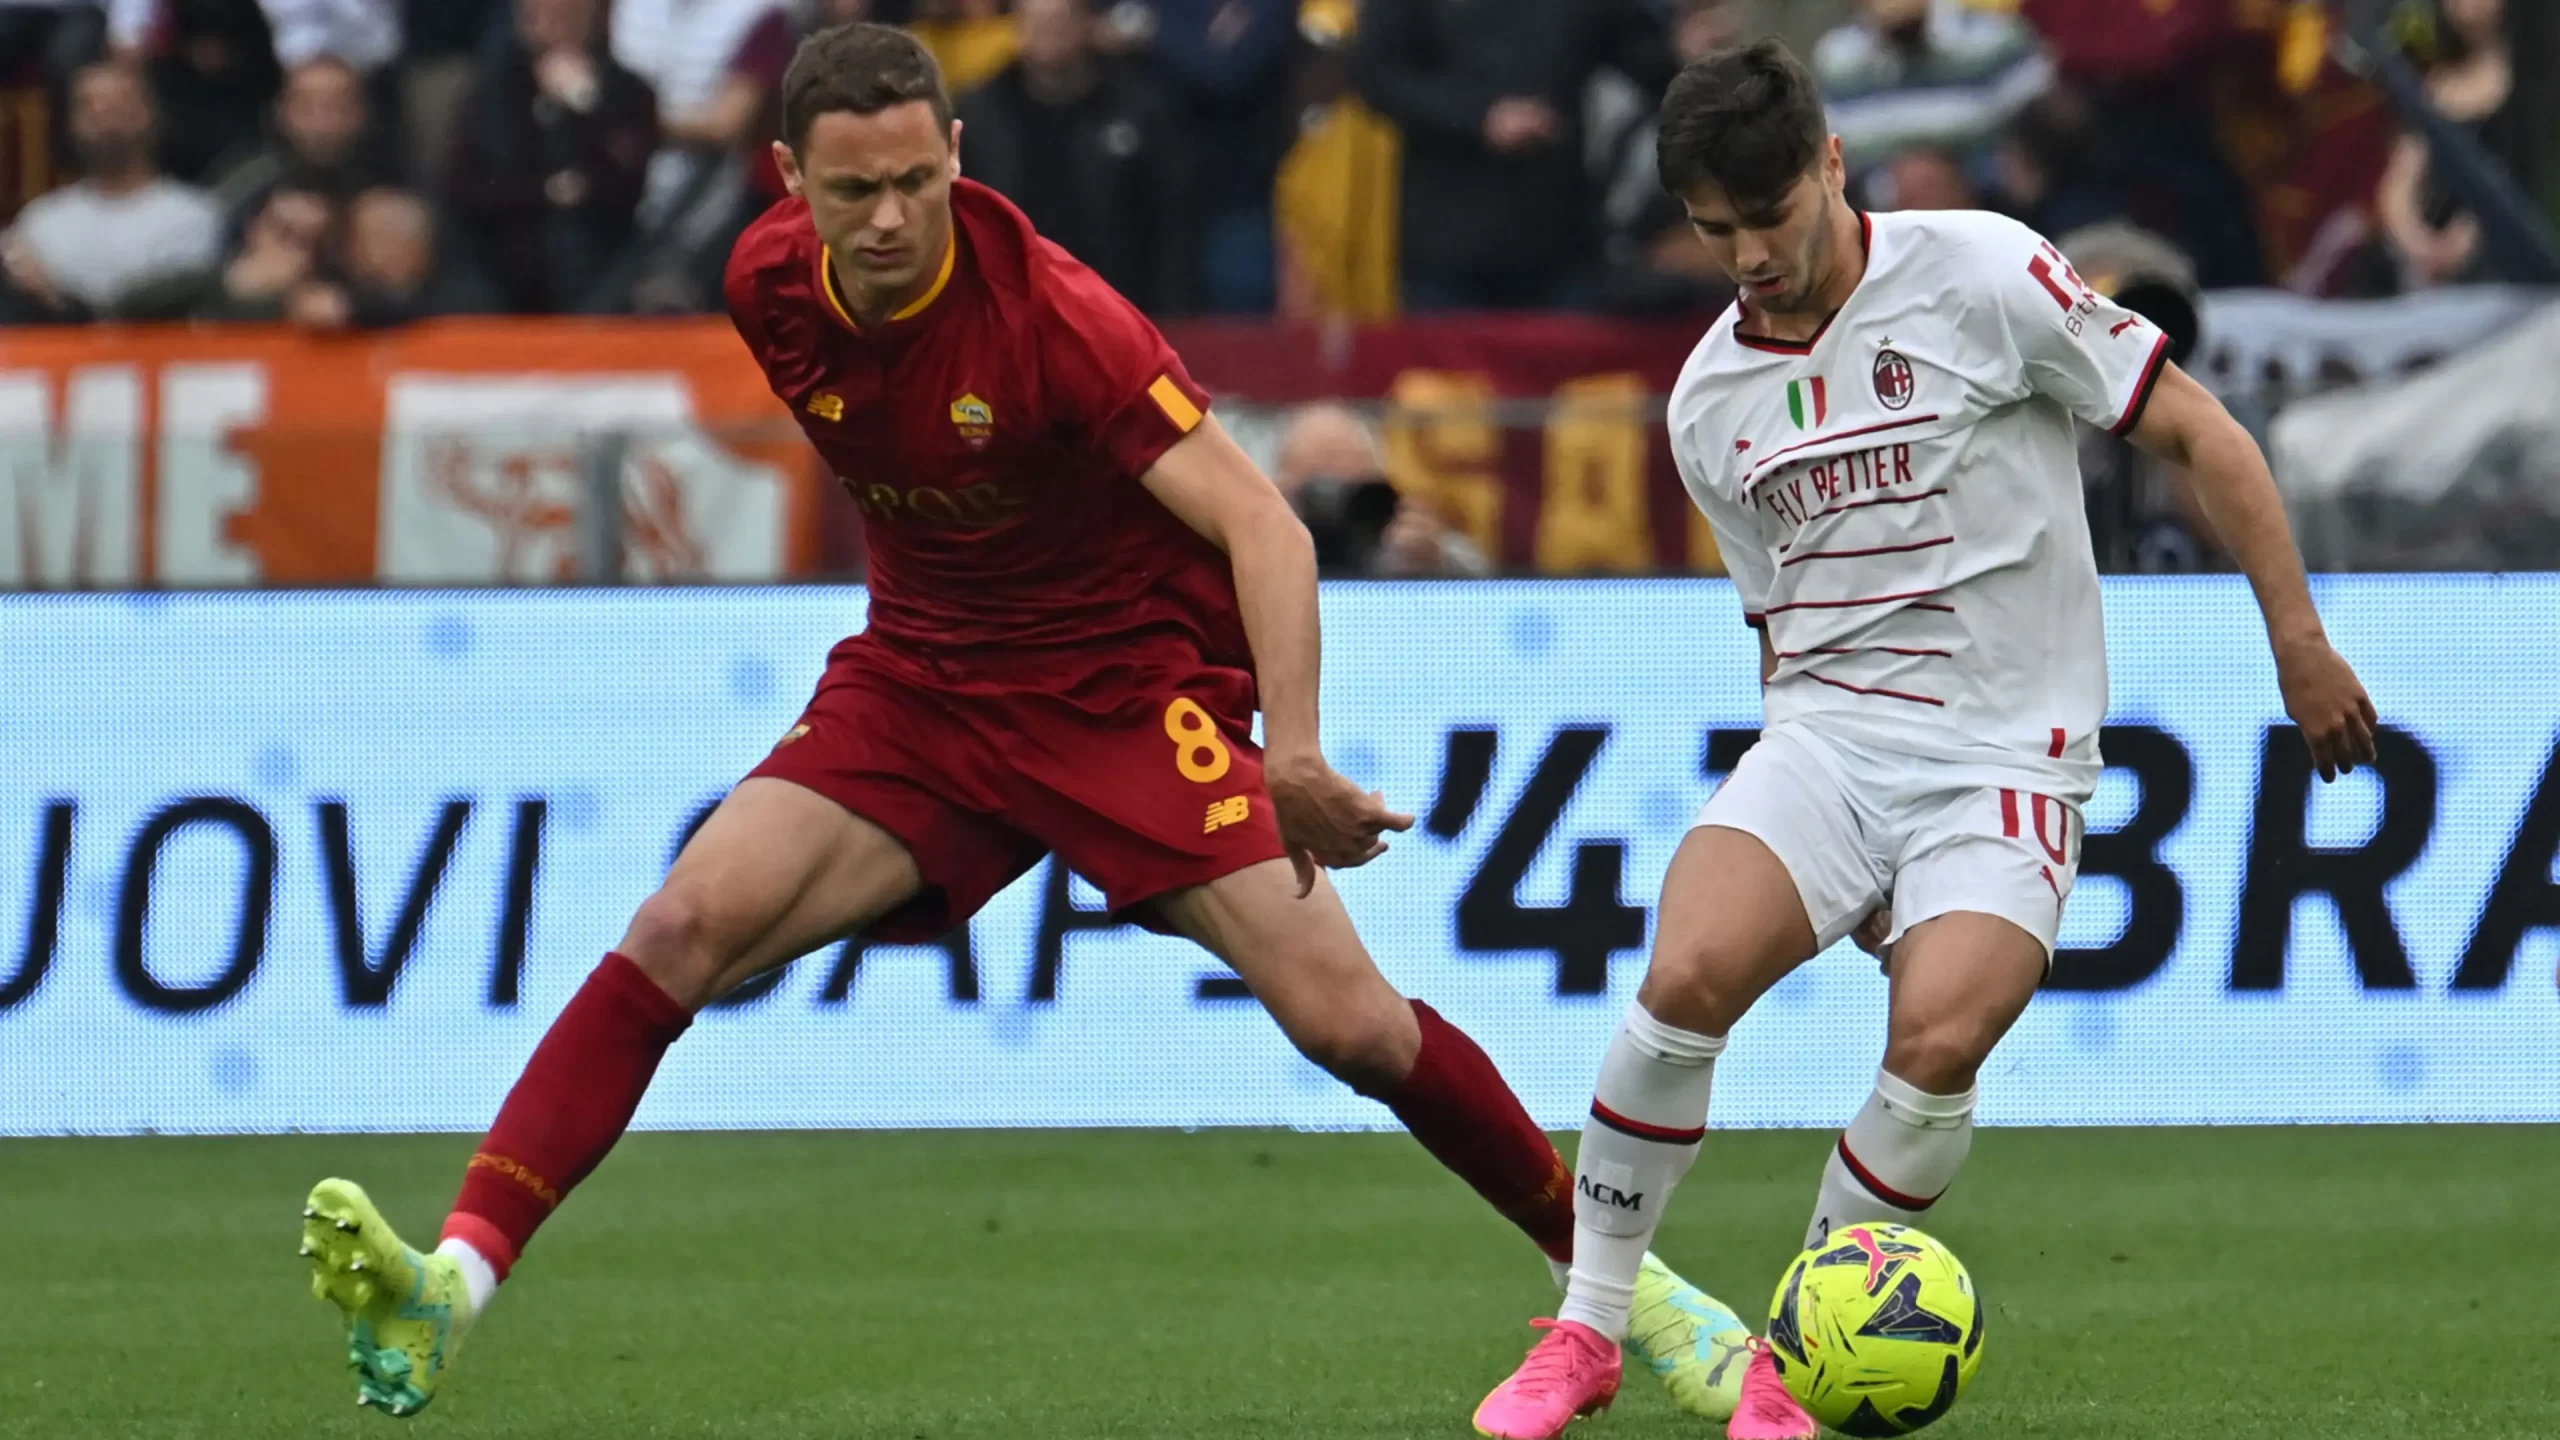 Two late goals at the Stadio Olimpico on Saturday evening meant that Roma and Milan couldn't be separated in a rollercoaster of emotions in the capital.